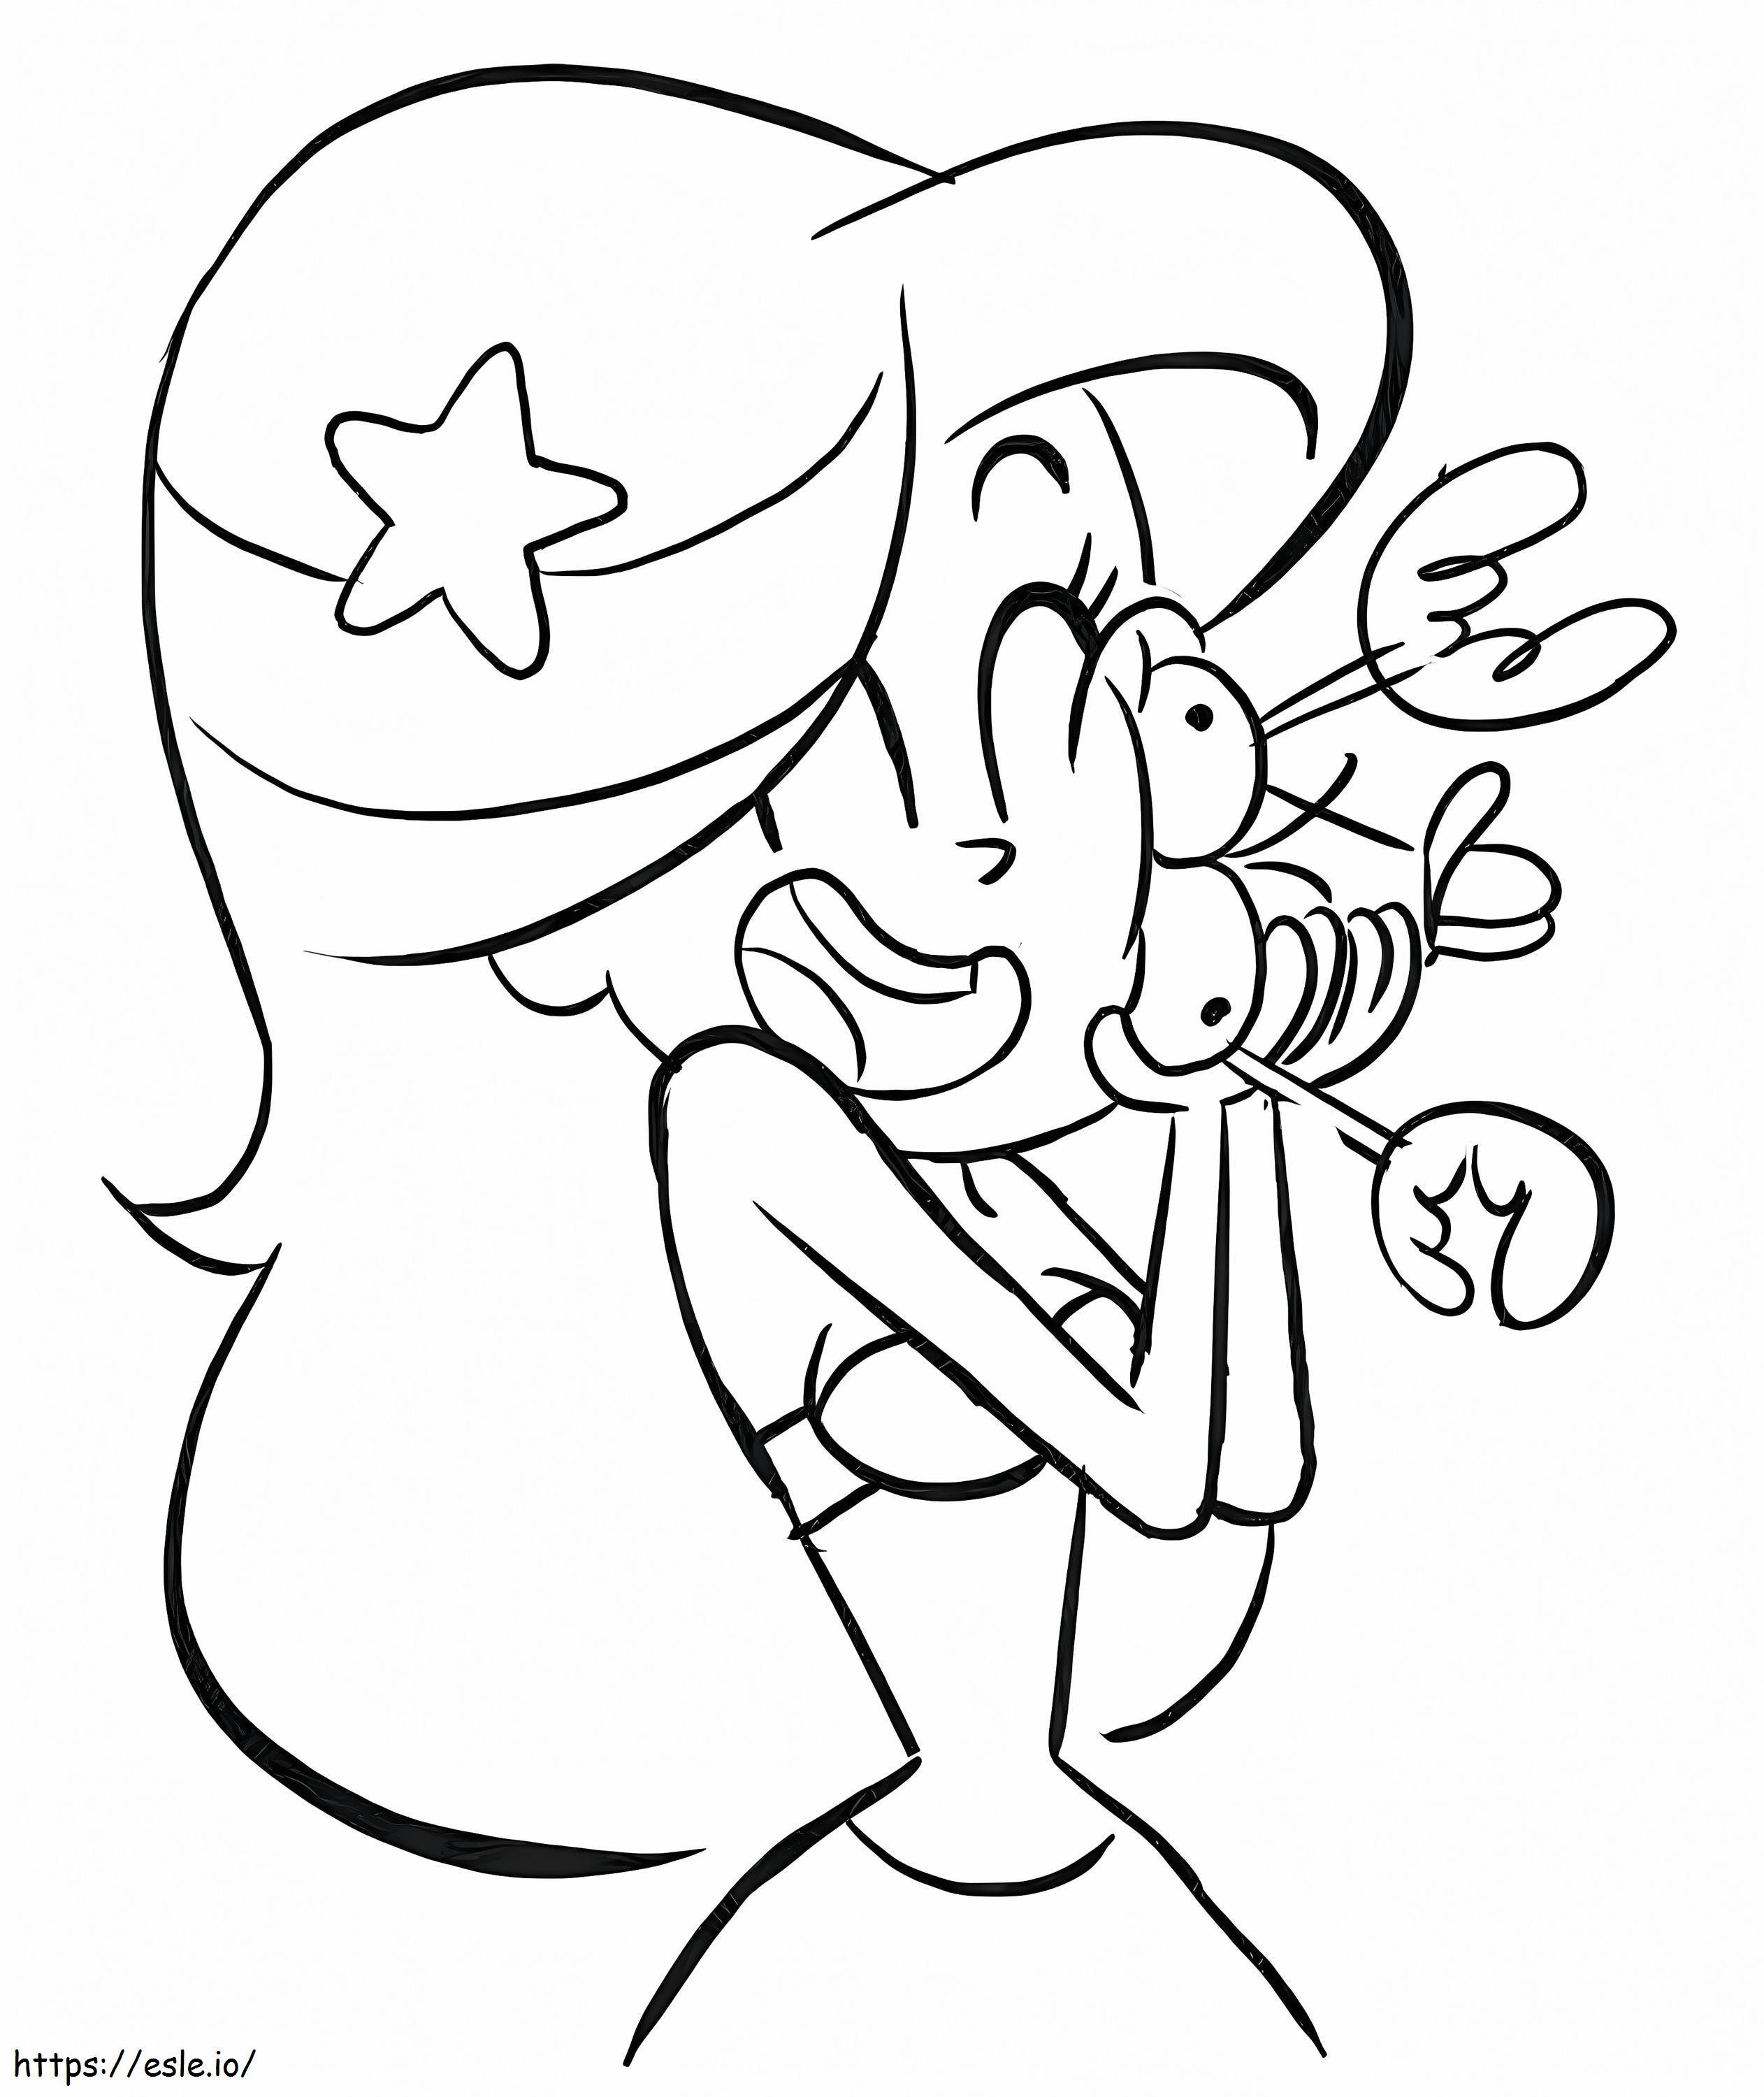 Marina And Bernie coloring page